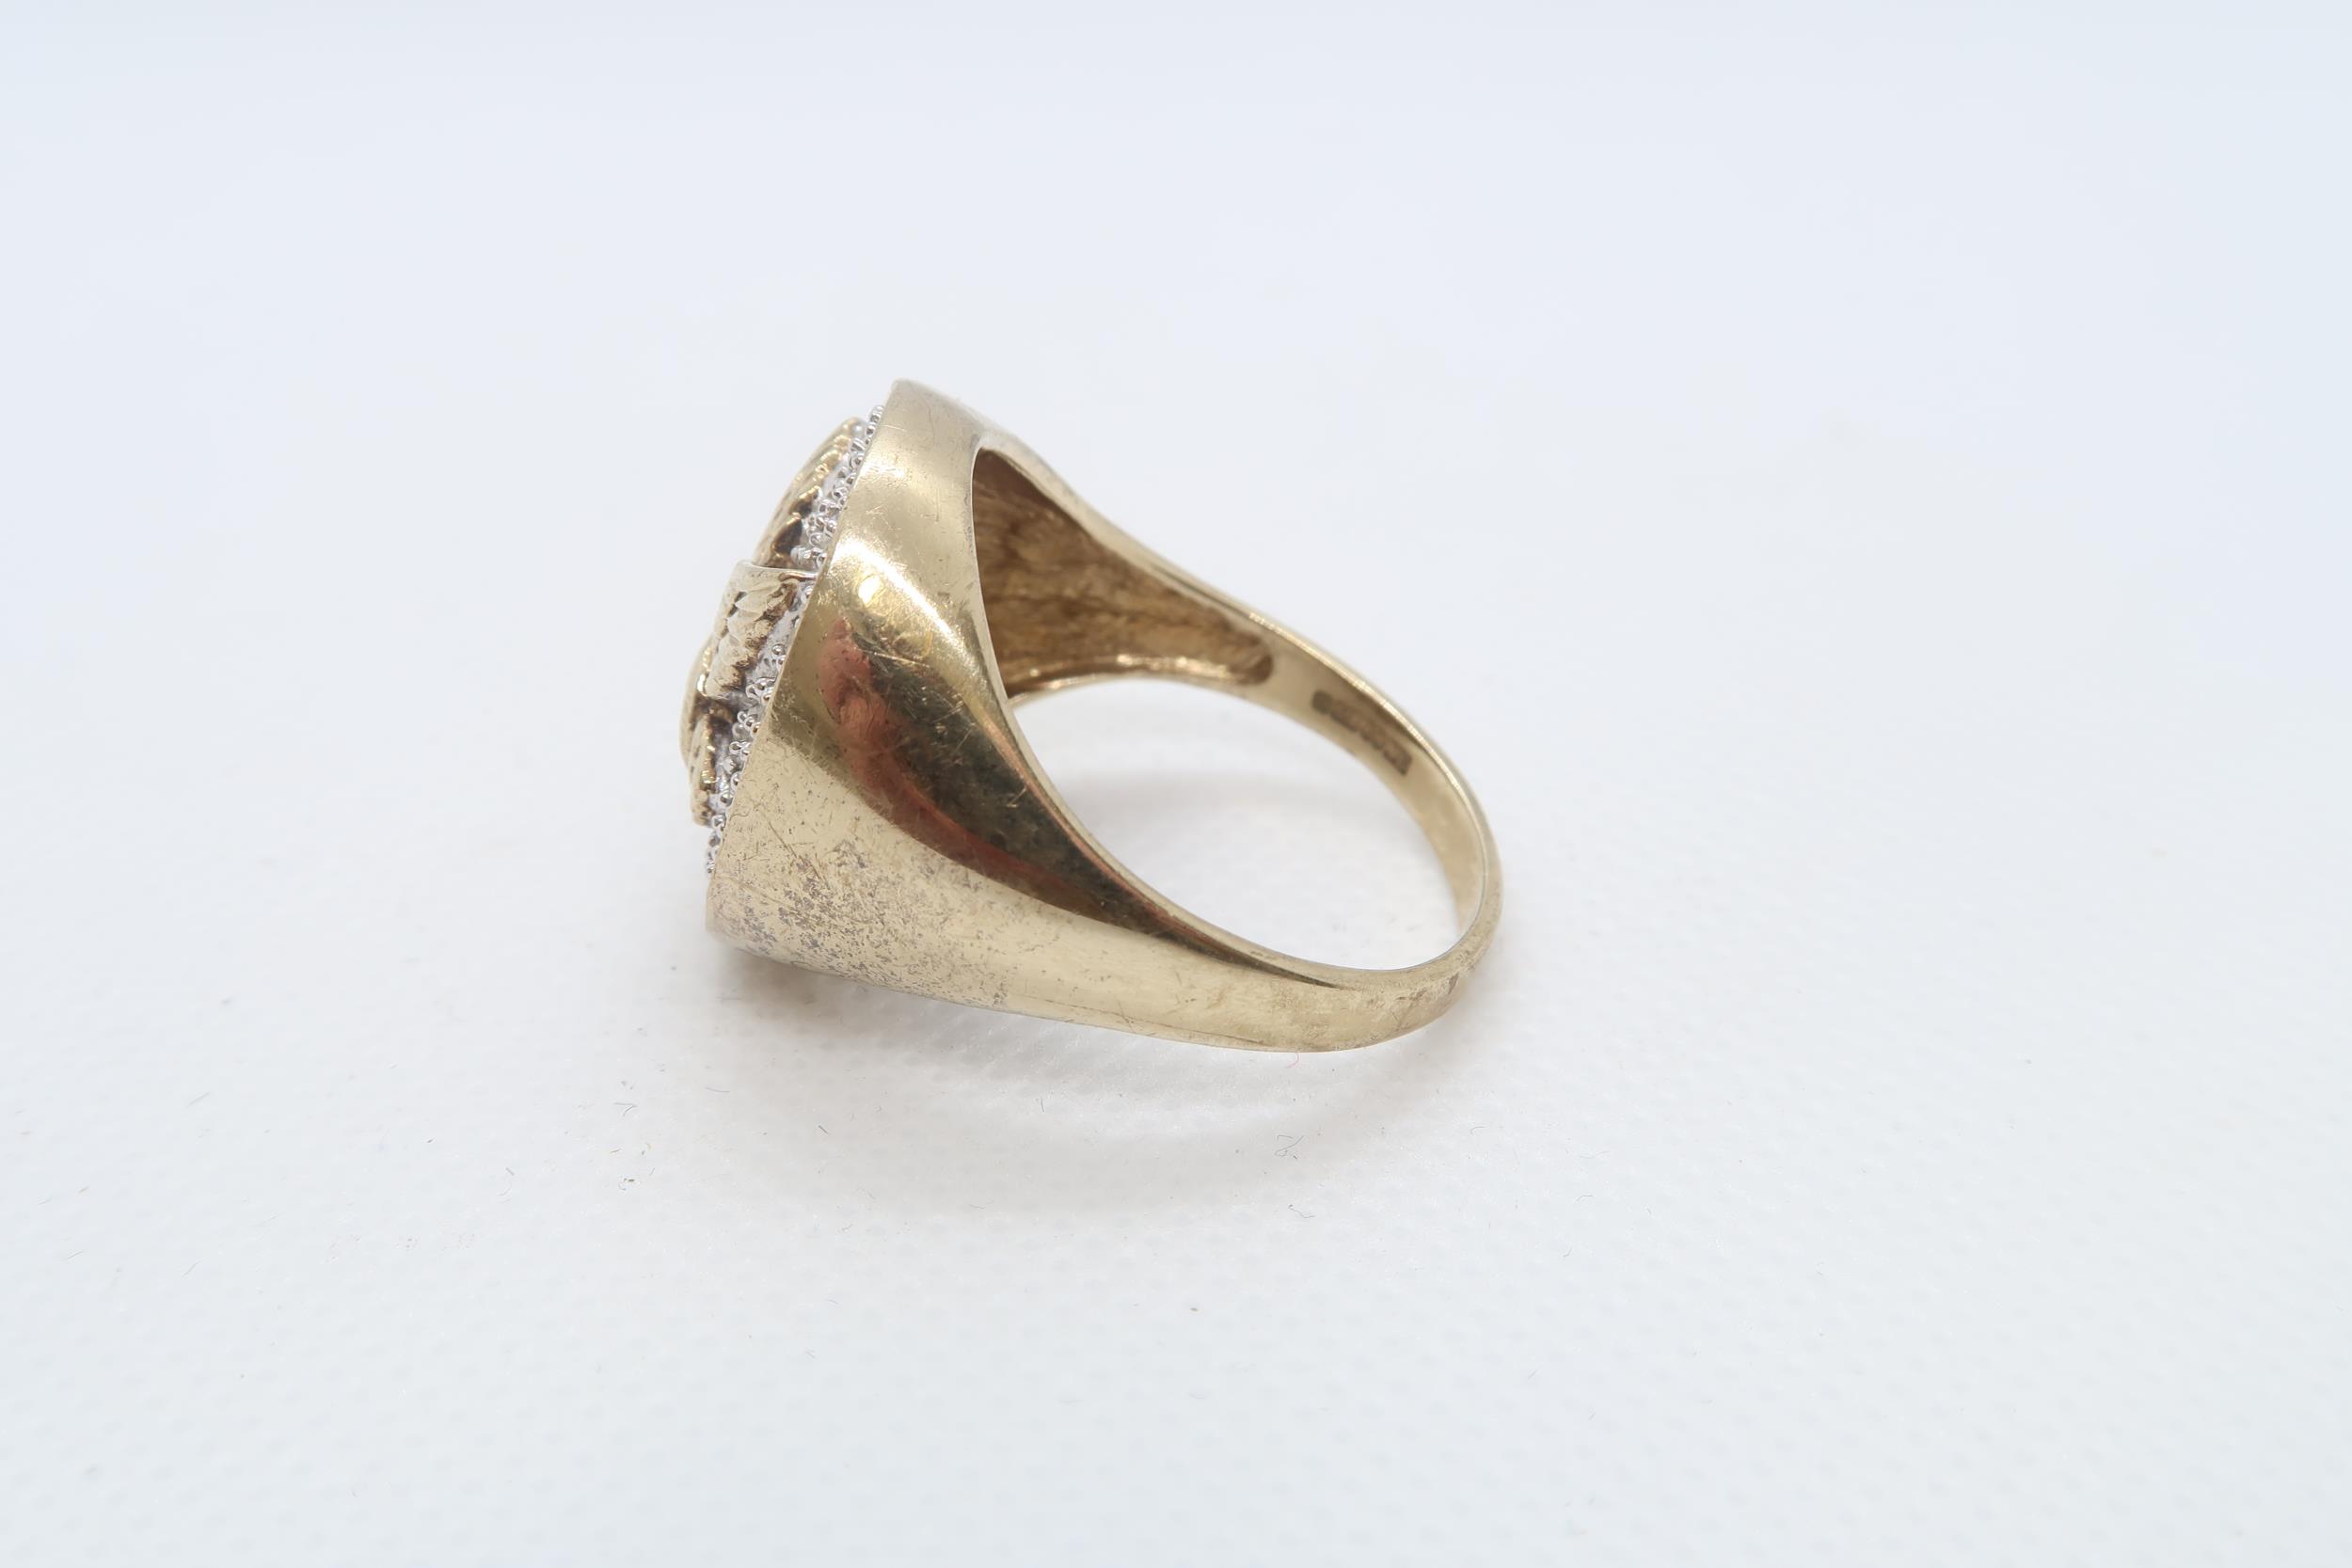 A 9ct yellow gold (hallmarked) mans ring with diamonds - ring size Z -approx weight 8.4 grams - Image 4 of 4